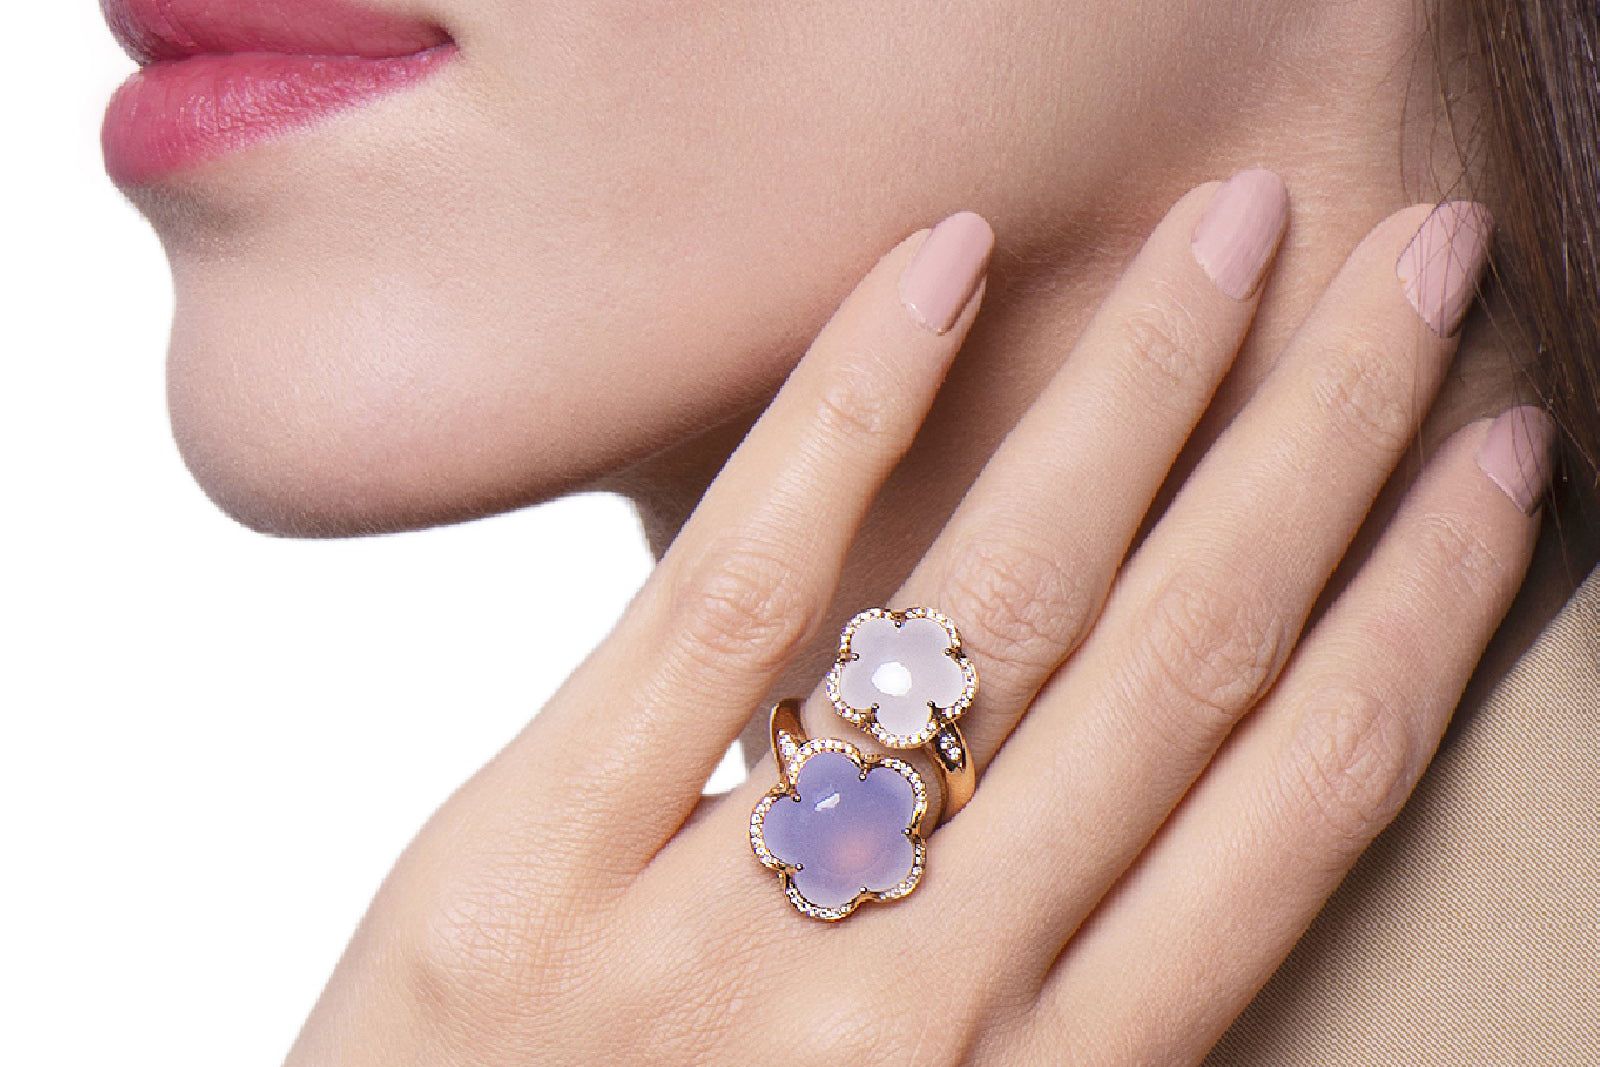 Pasquale Bruni Bon Ton rings, including a carved chalcedony similar to the 'Very Peri' Pantone Colour of the Year